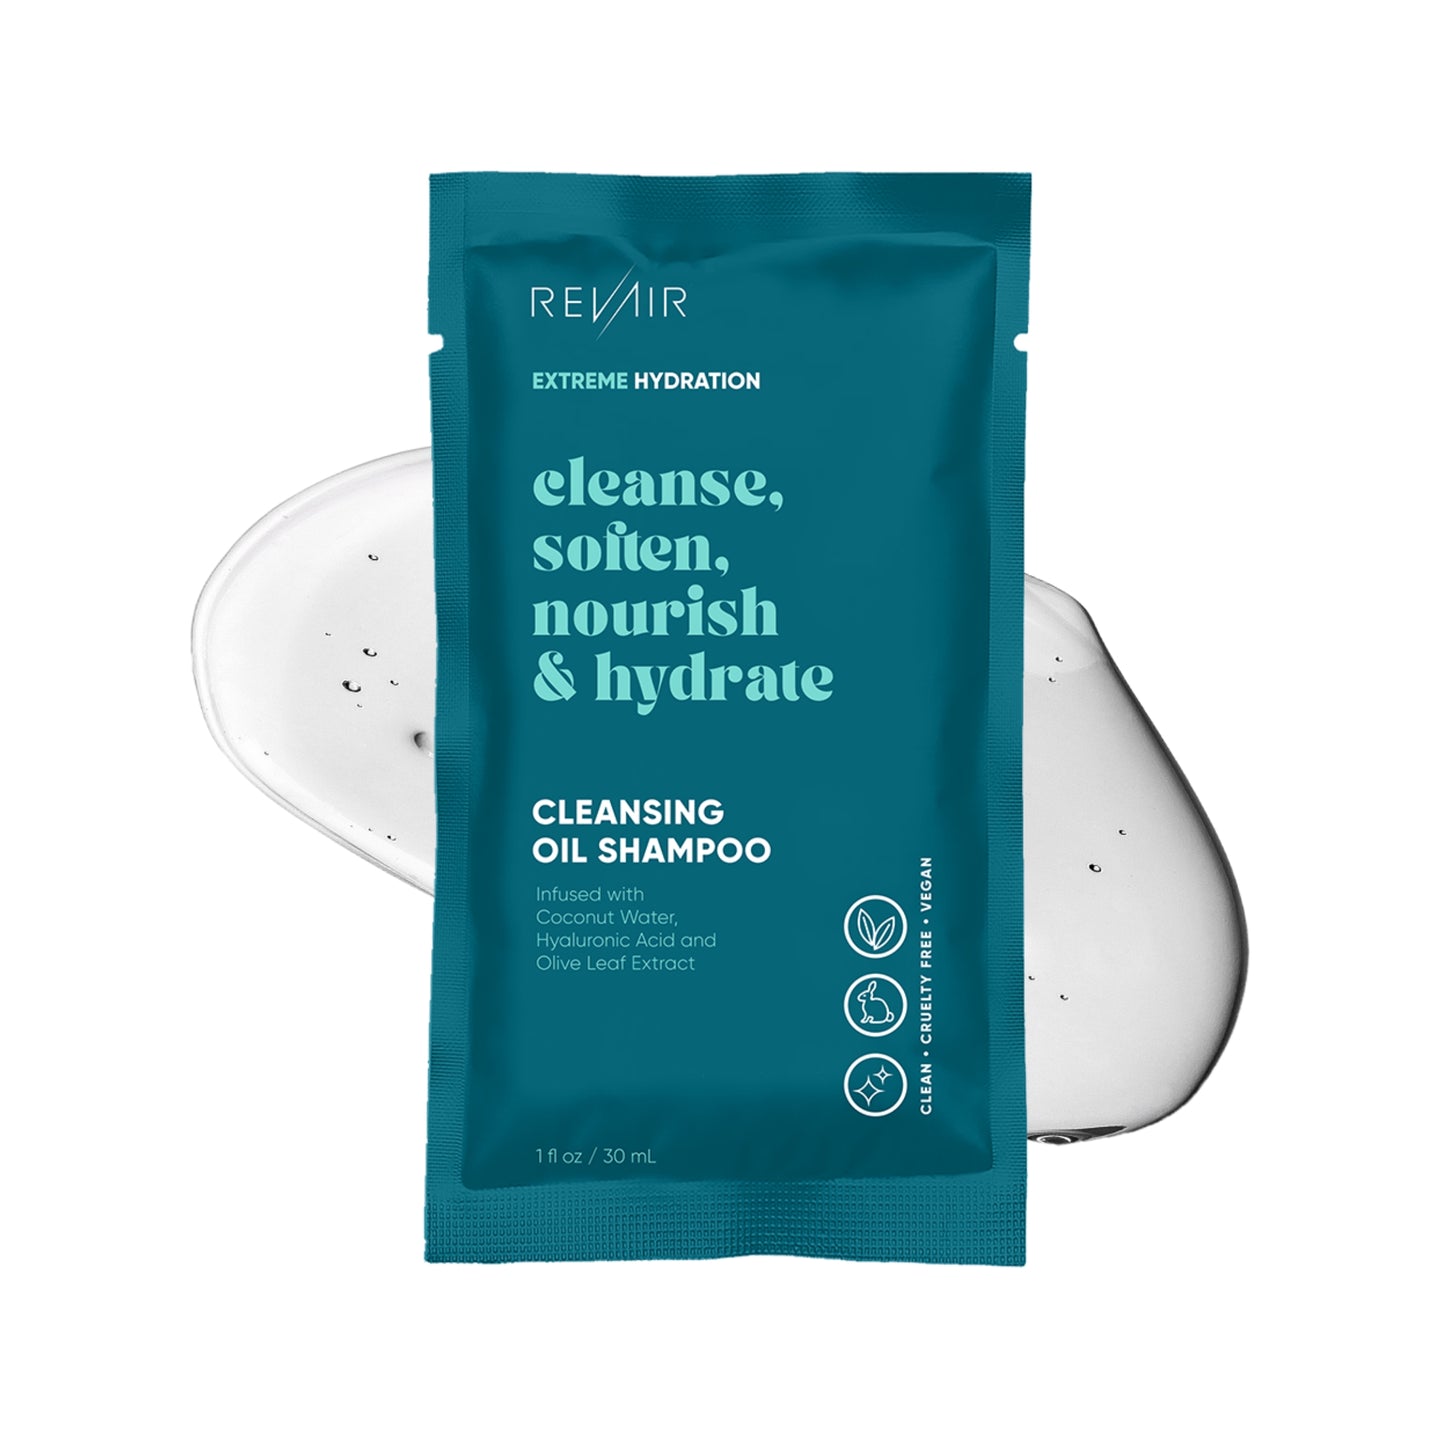 Cleansing Oil Shampoo Deluxe 1oz packet - cleanse, soften, nourish & hydrate